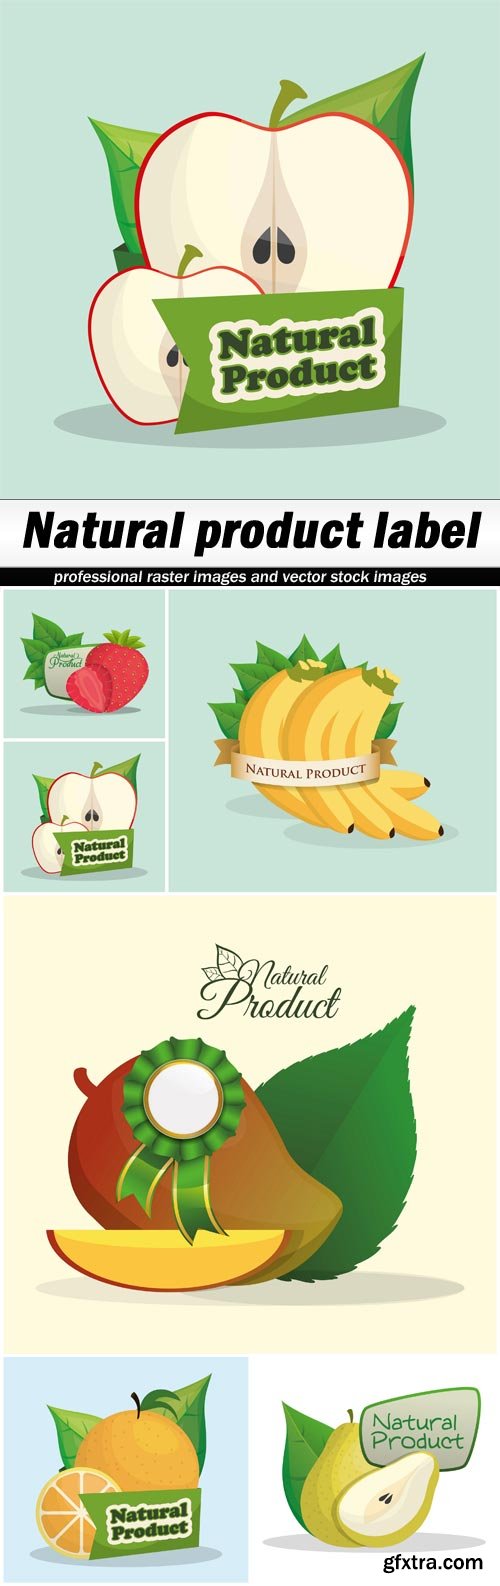 Natural product label - 6 EPS